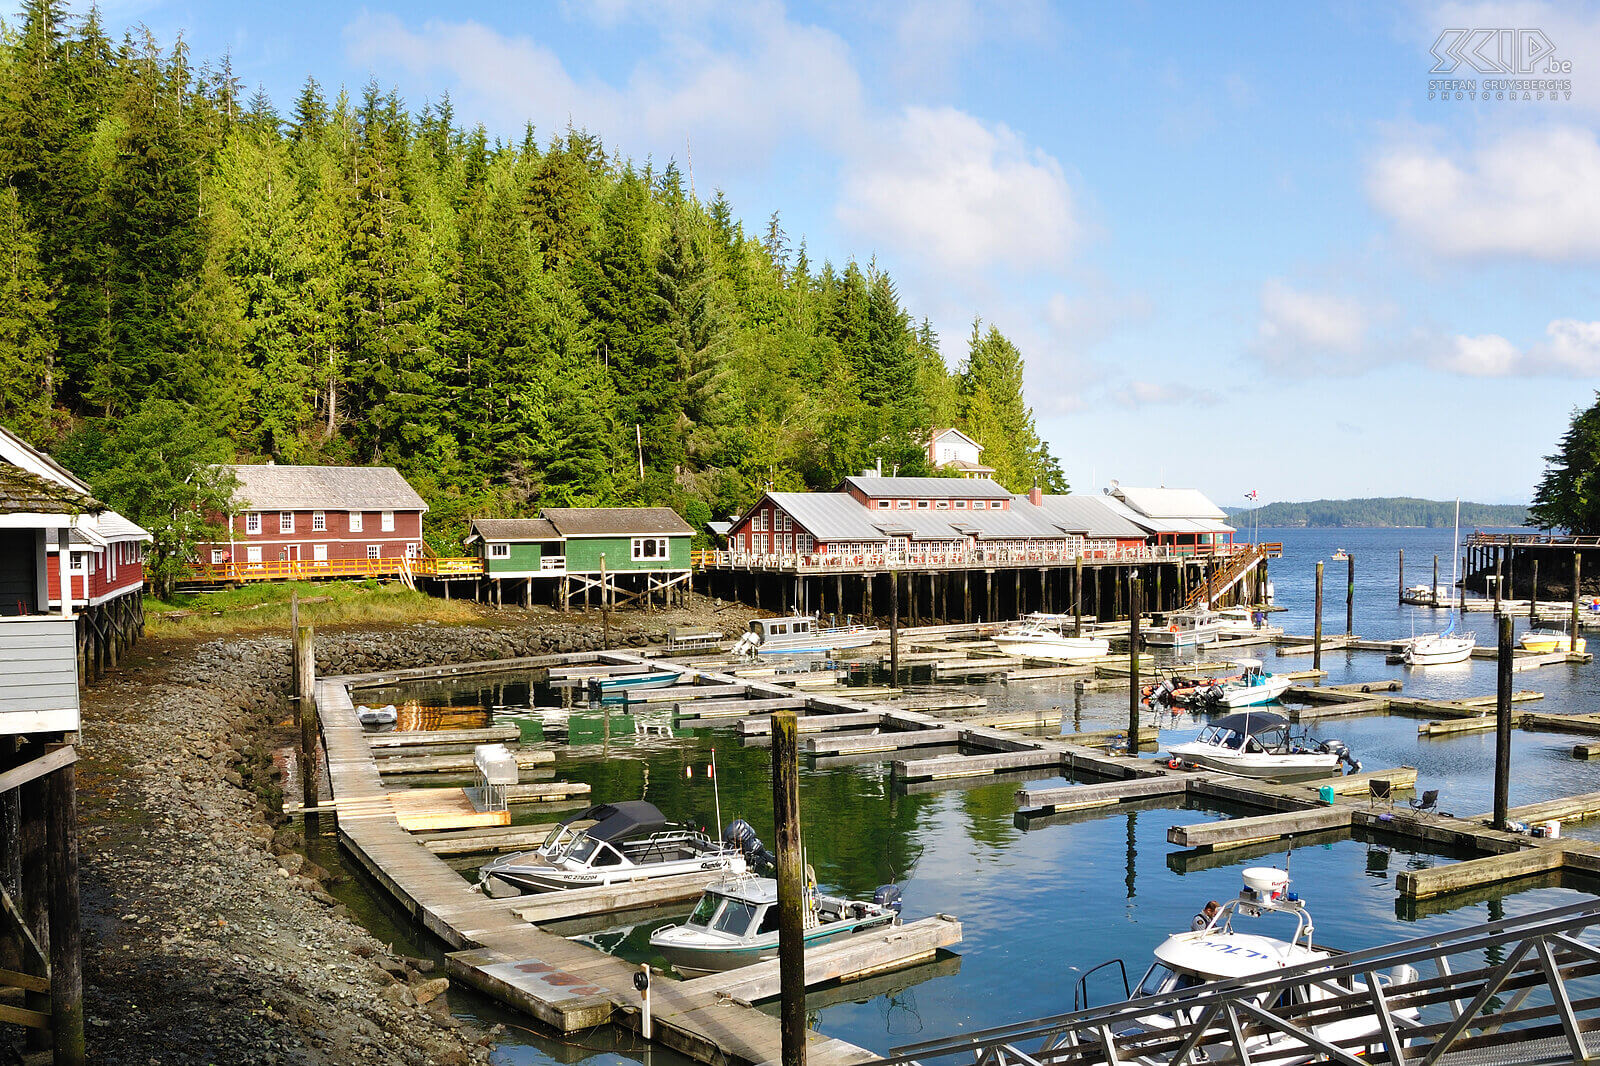 Telegraph Cove Telegraph Cove is an old fishing village on the east coast of Vancouver Island. The ideal base for excursions to the sea or to look for grizzly bears on the mainland. Stefan Cruysberghs